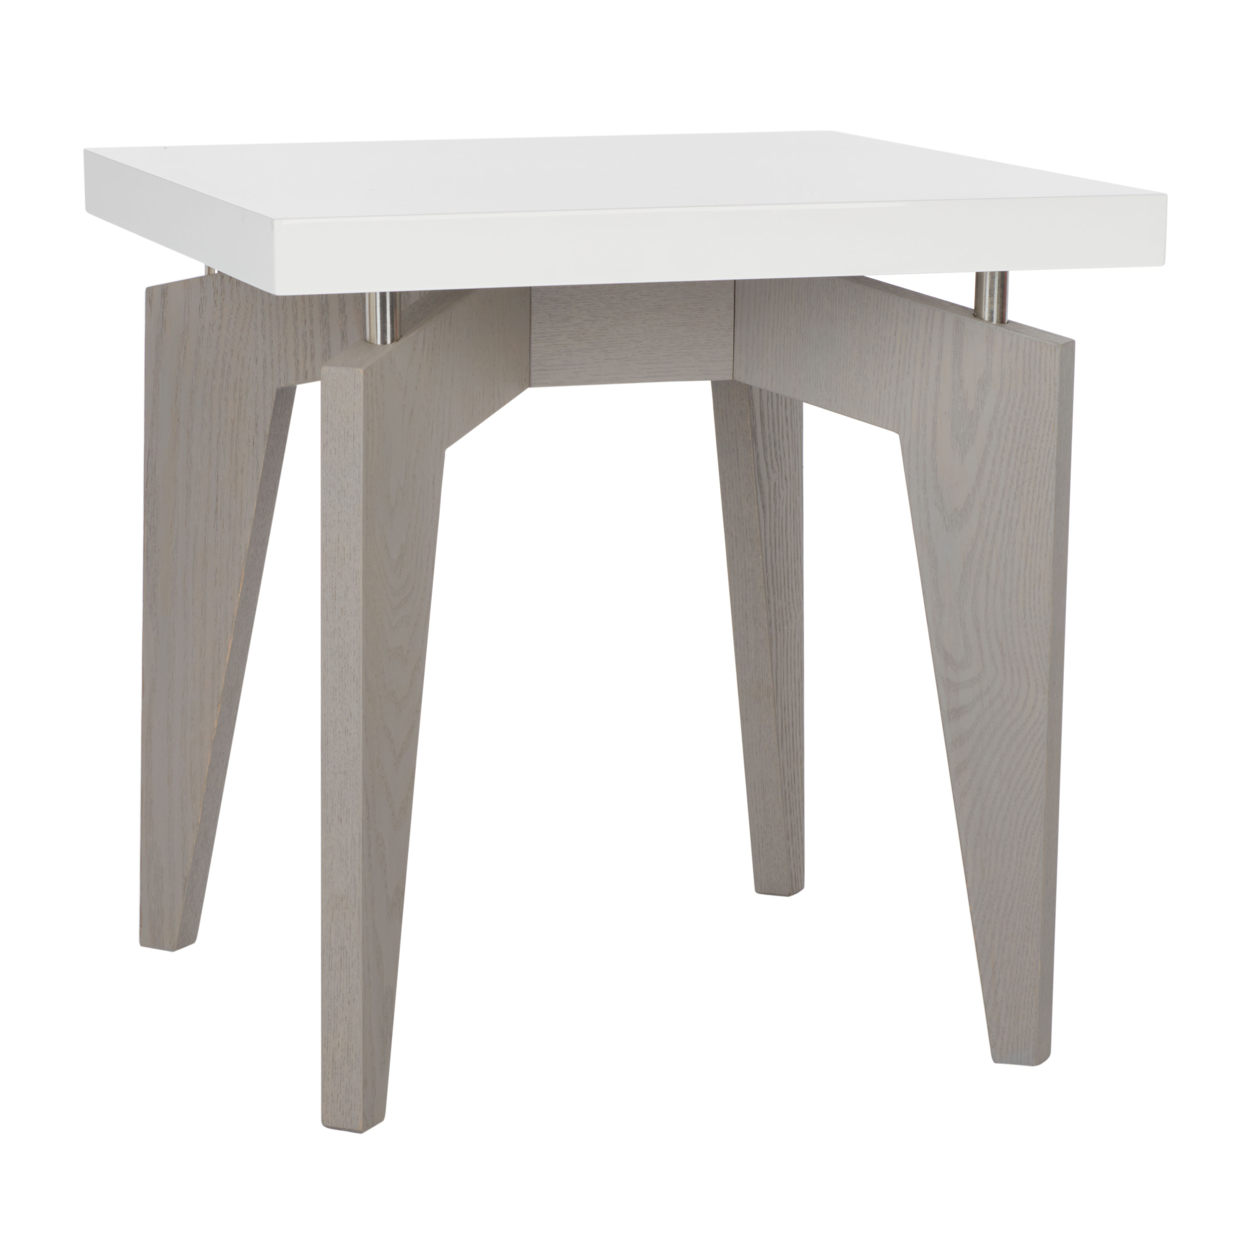 SAFAVIEH Josef Retro Lacquer Floating Top Lacquer End Table White / Grey